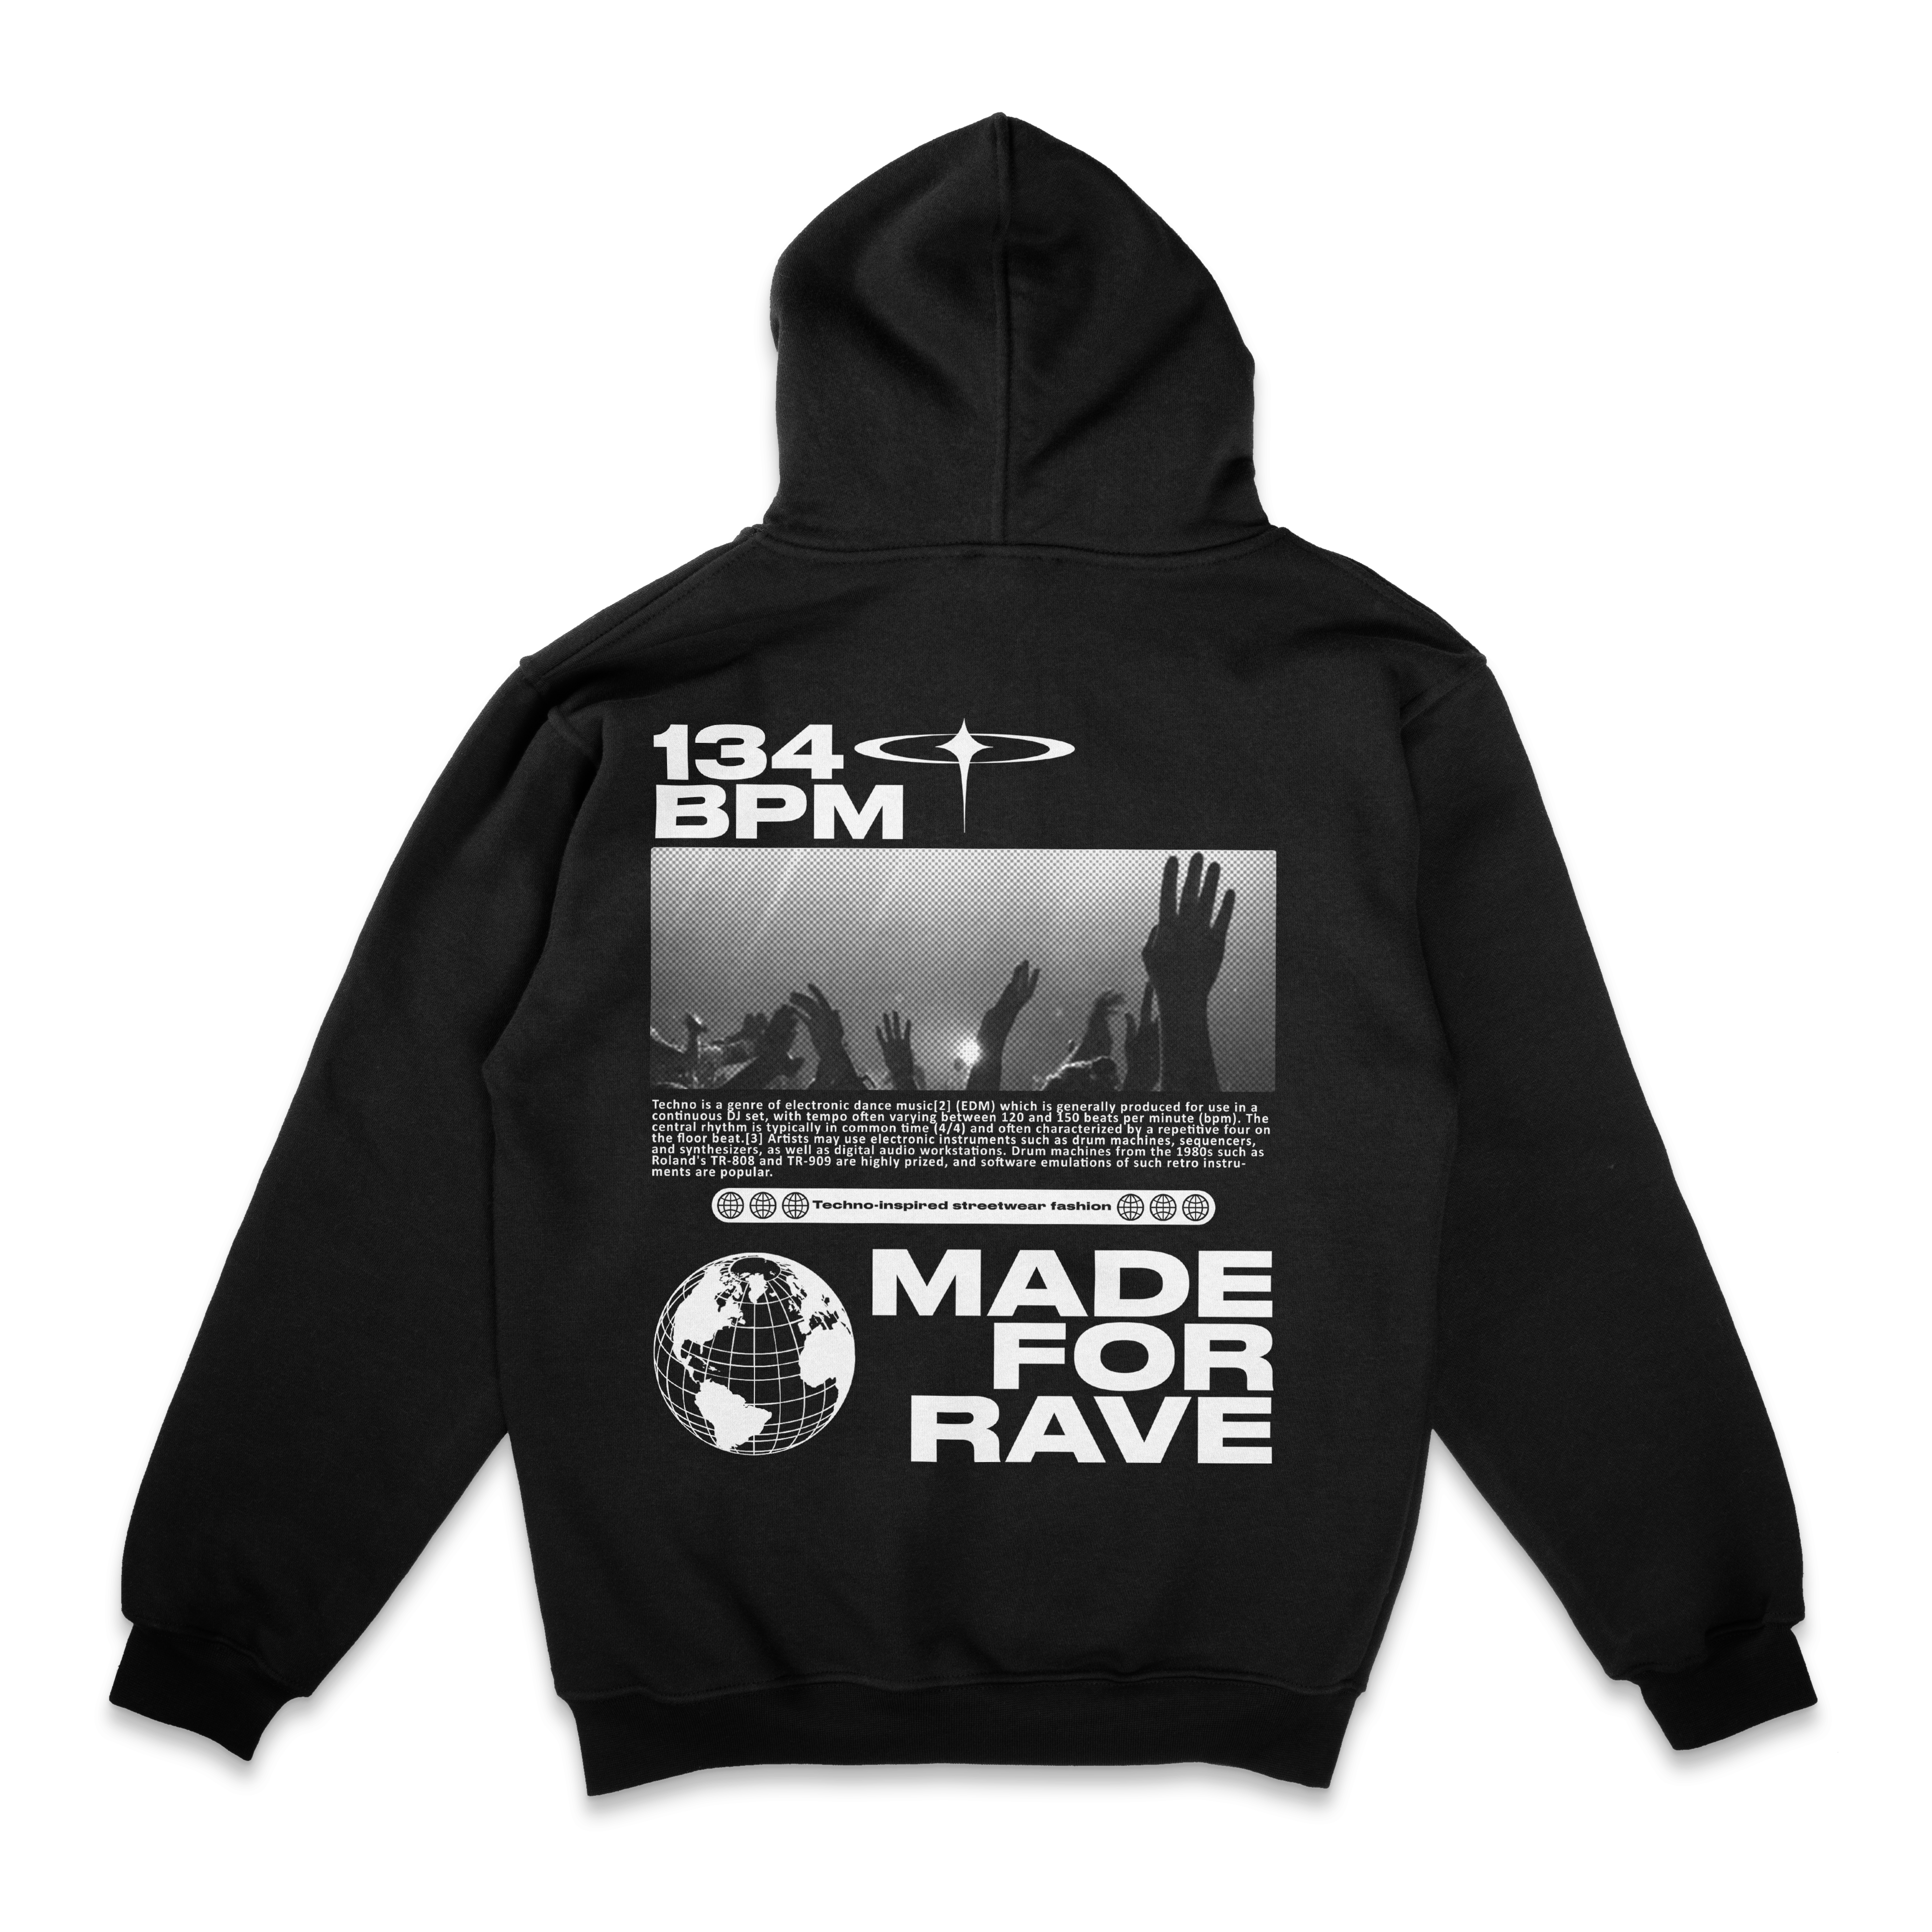 Made for Rave - Oversized Hoodie Unisex